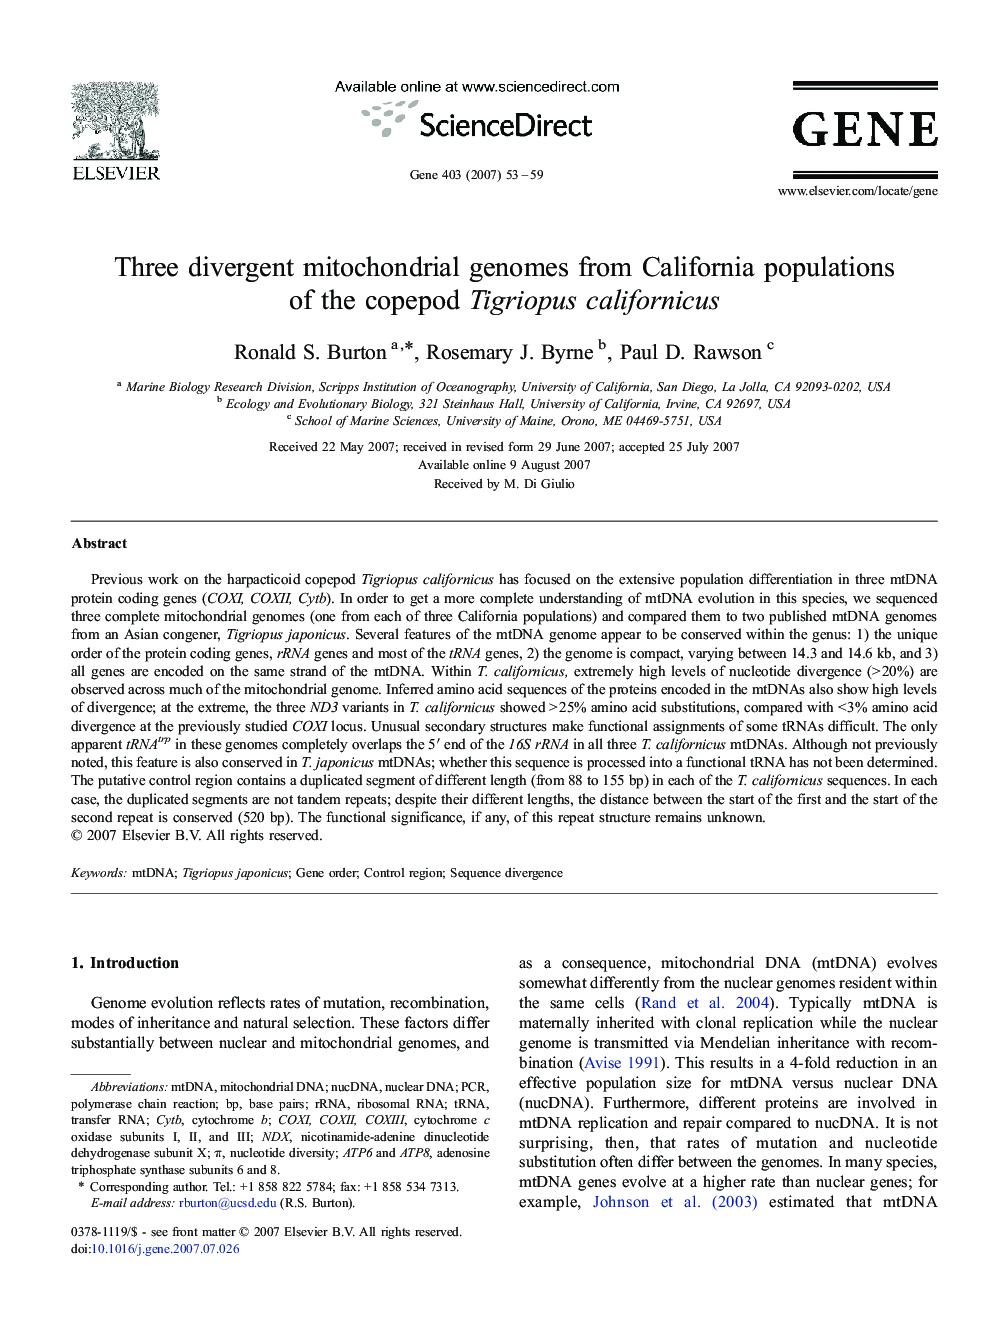 Three divergent mitochondrial genomes from California populations of the copepod Tigriopus californicus